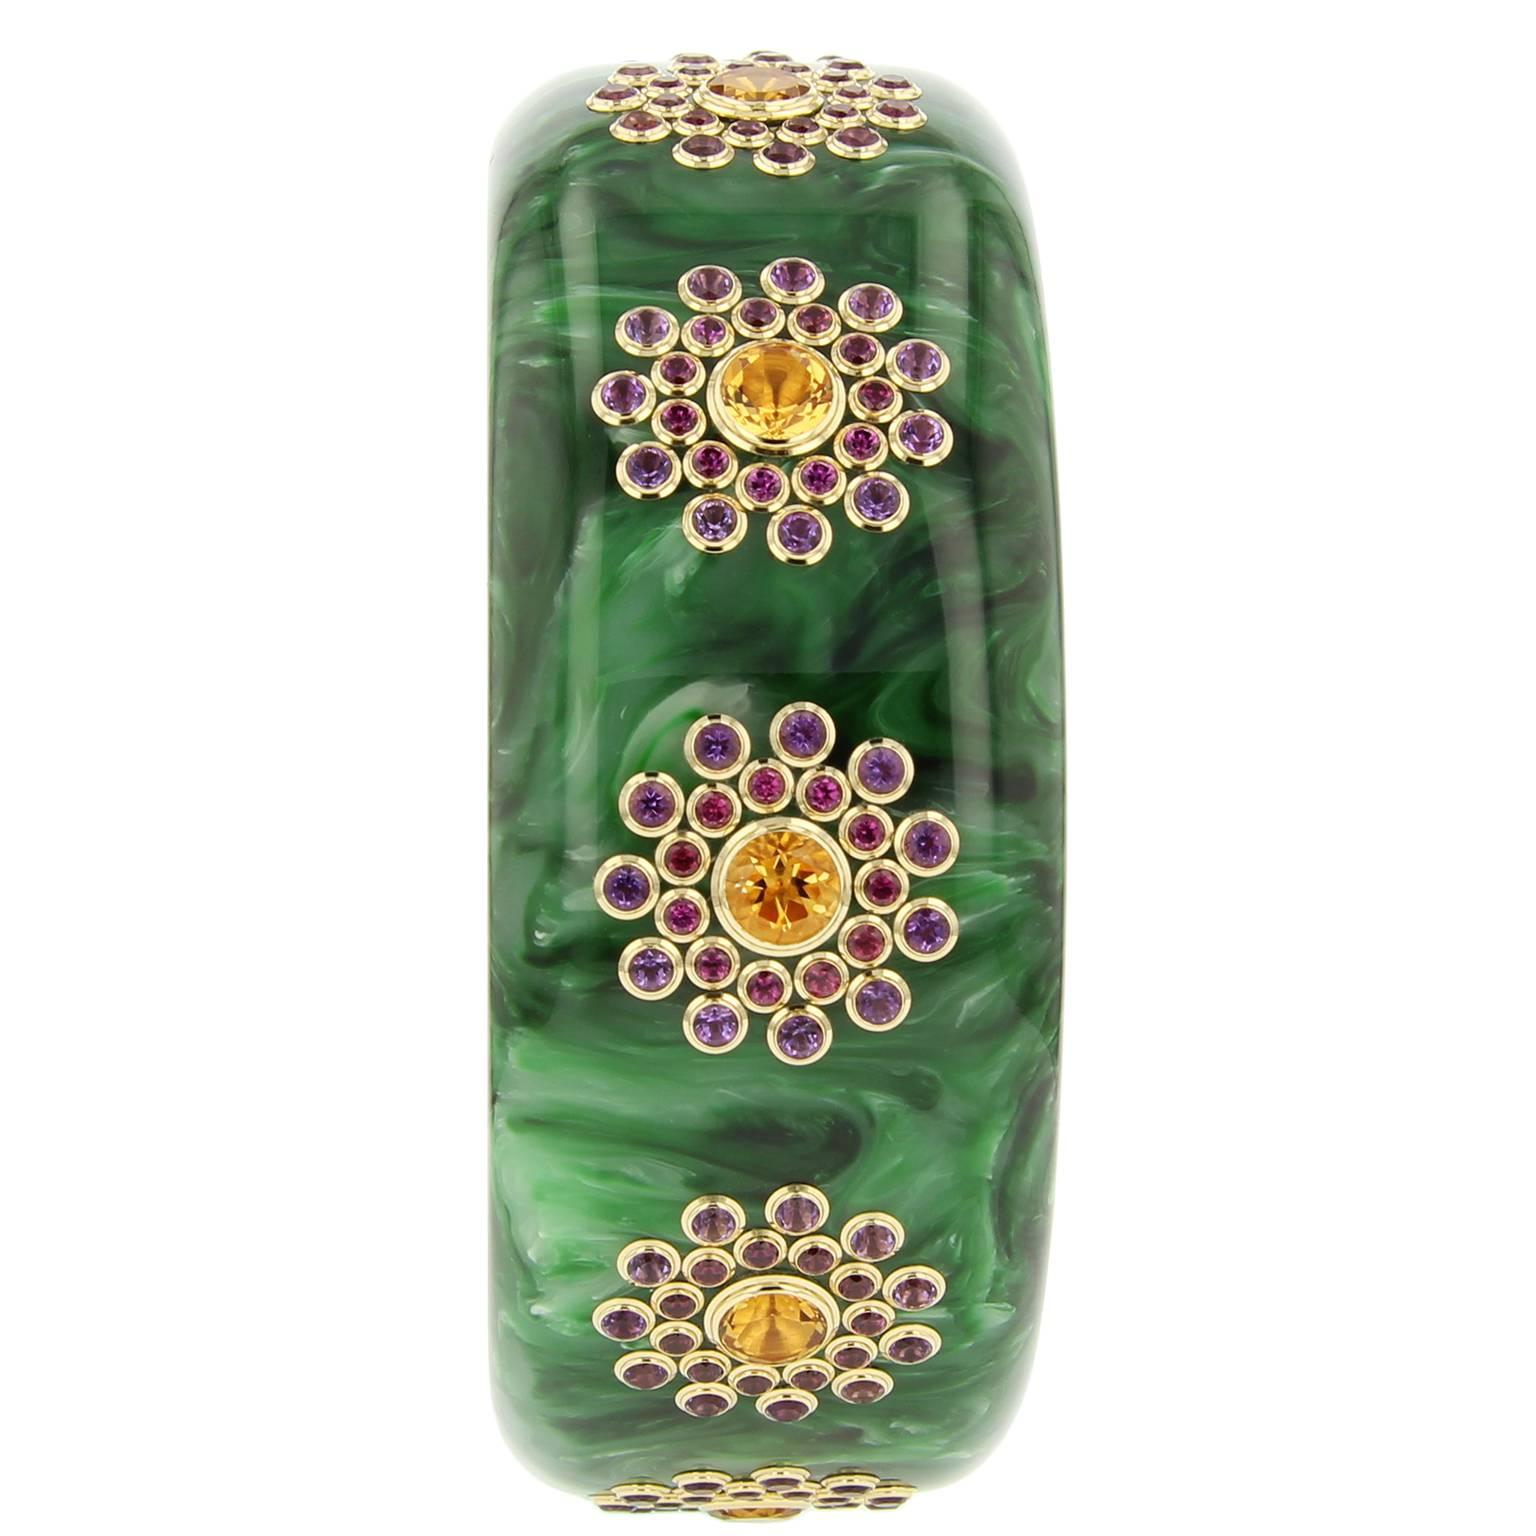 This stunning Mark Davis bangle was handcrafted of vintage marbled green bakelite. Detailed with precise clusters of amethyst, rhodolite garnet and large citrine bezel-set in 18k yellow gold. 

Full details below: 
• From the Mark Davis Bakelite